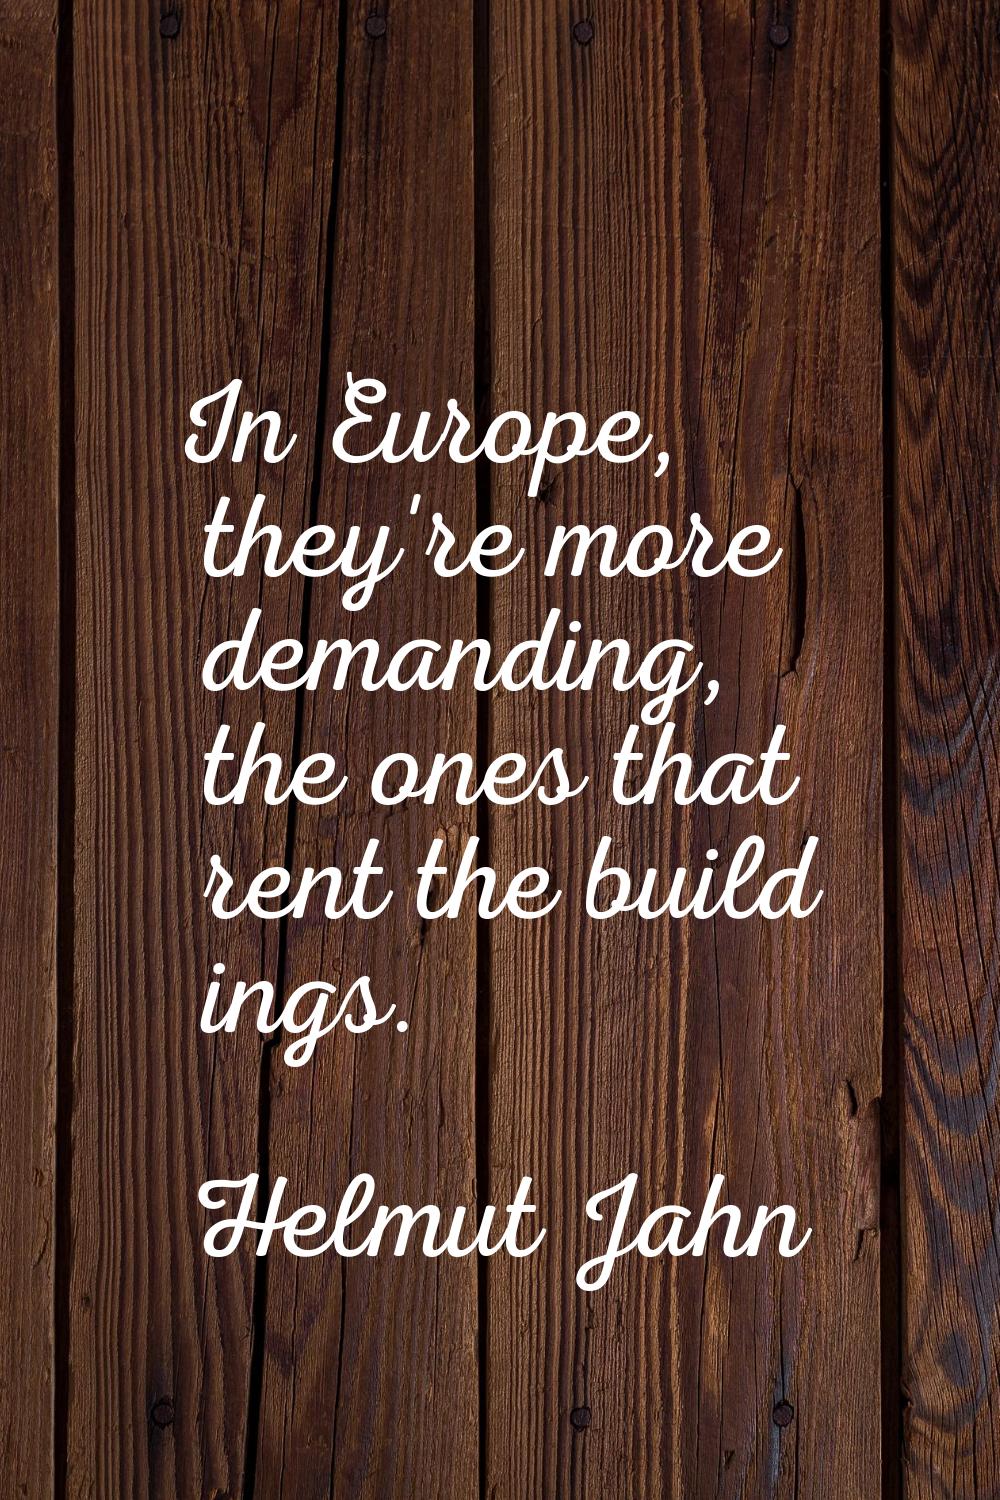 In Europe, they're more demanding, the ones that rent the build ings.